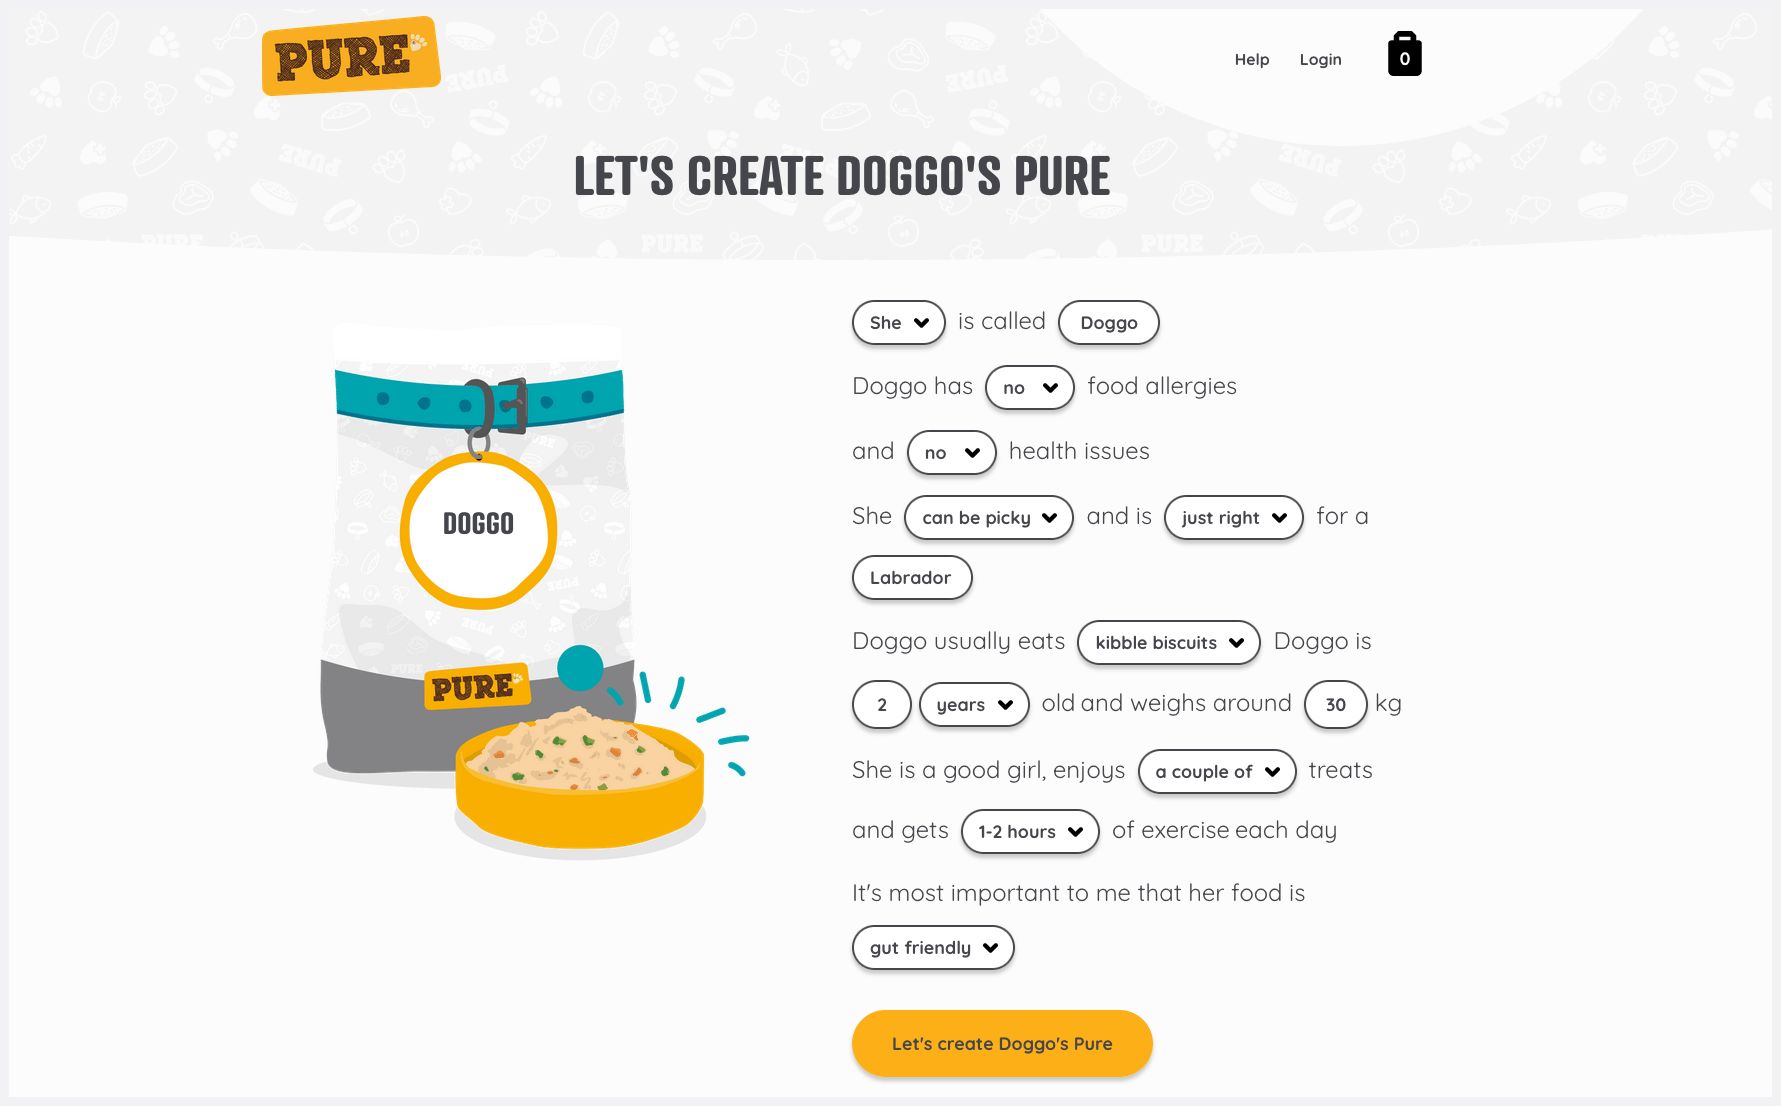 Pure Pet Food website and questionnaire